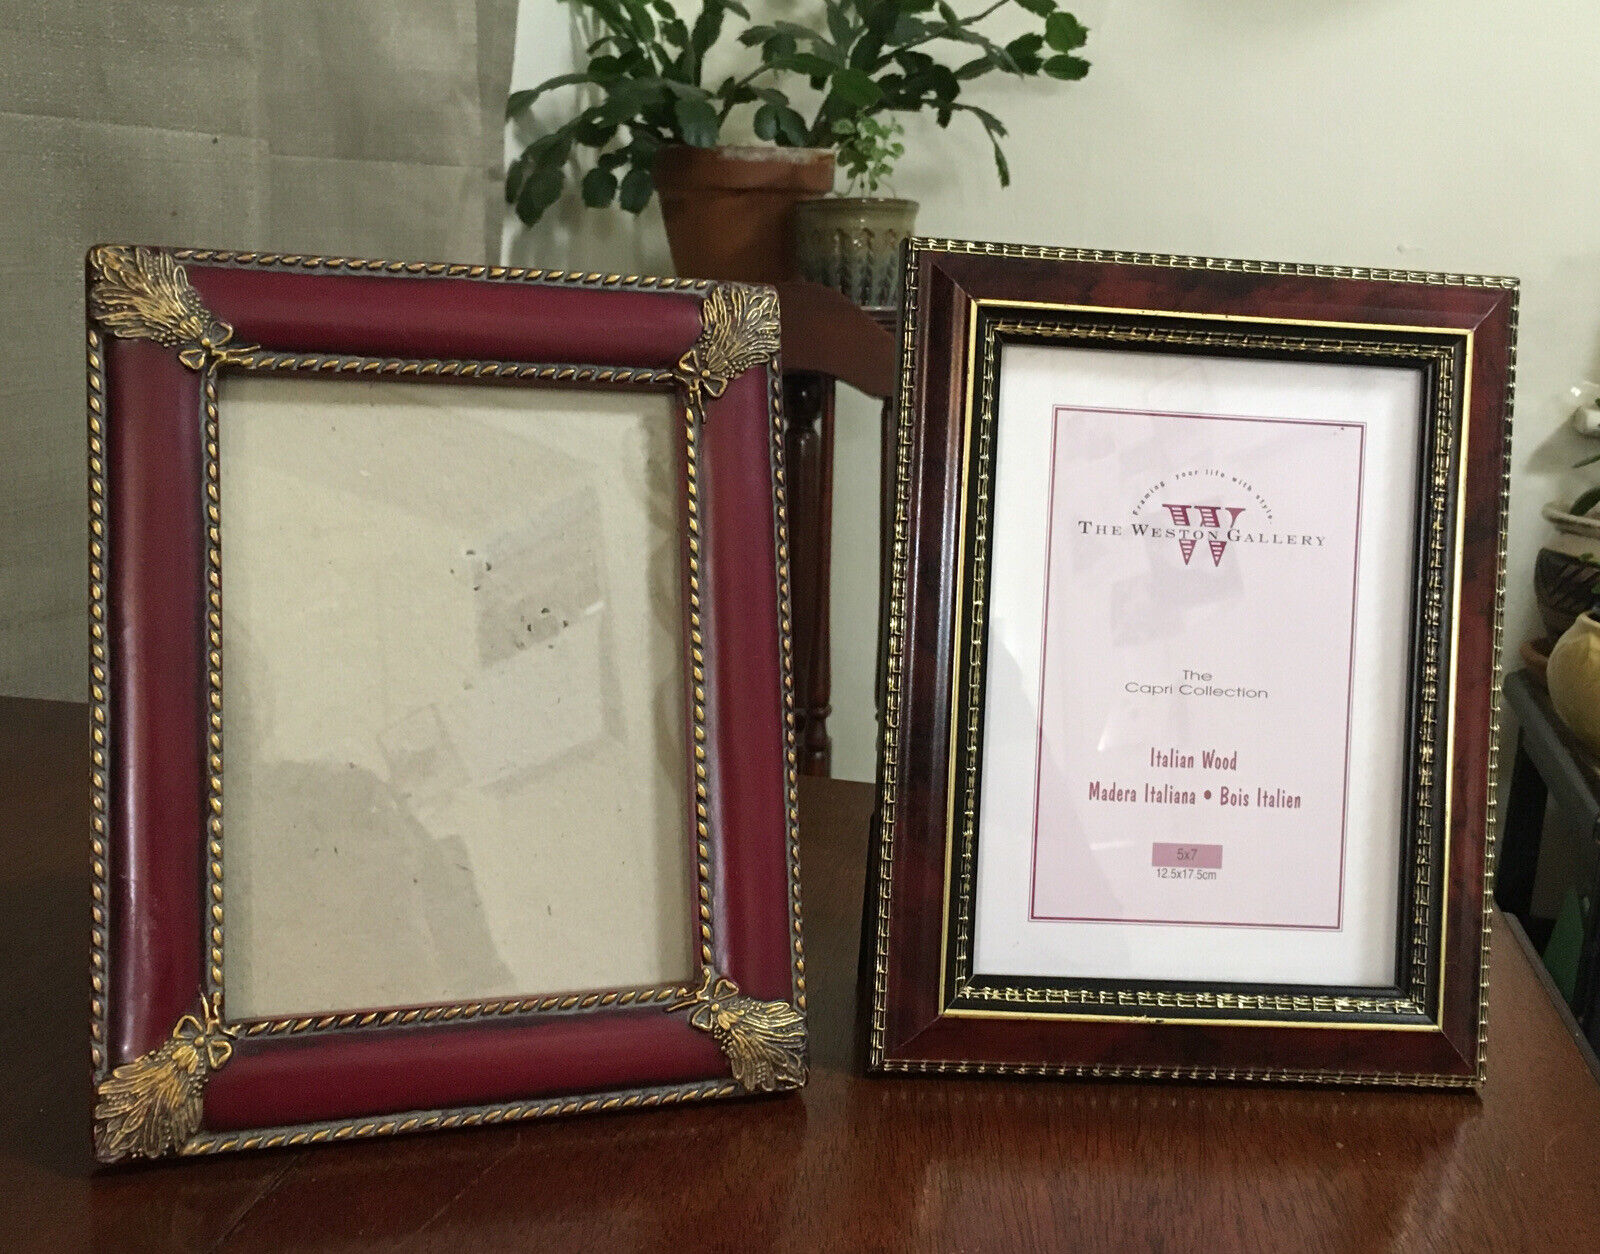 Lot of 2 Wood Picture Frames Weston Gallery Red Gold Wheat Capri Italian 5x7”